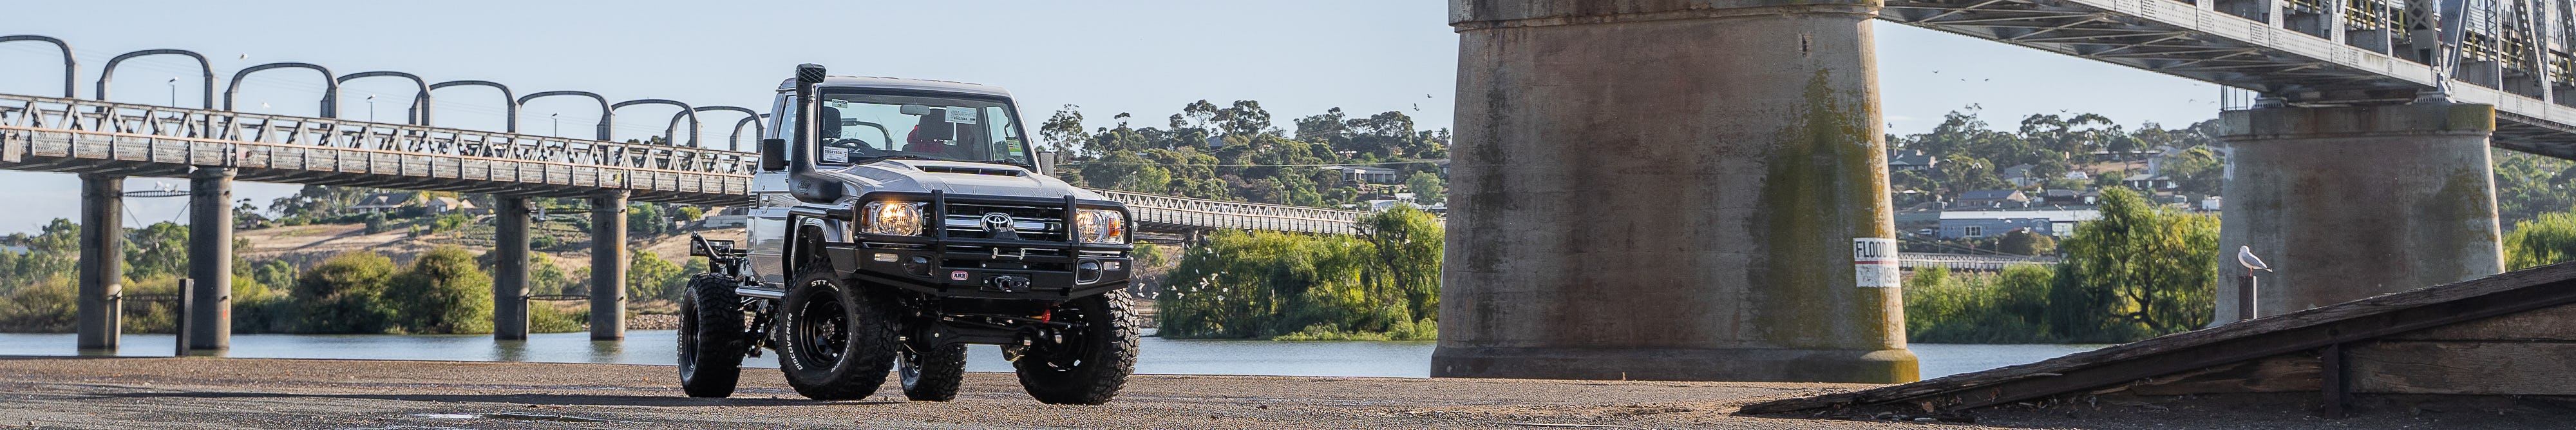 2021 Toyota Landcruiser 79 Series customised with snorkel and ARB radiator protection